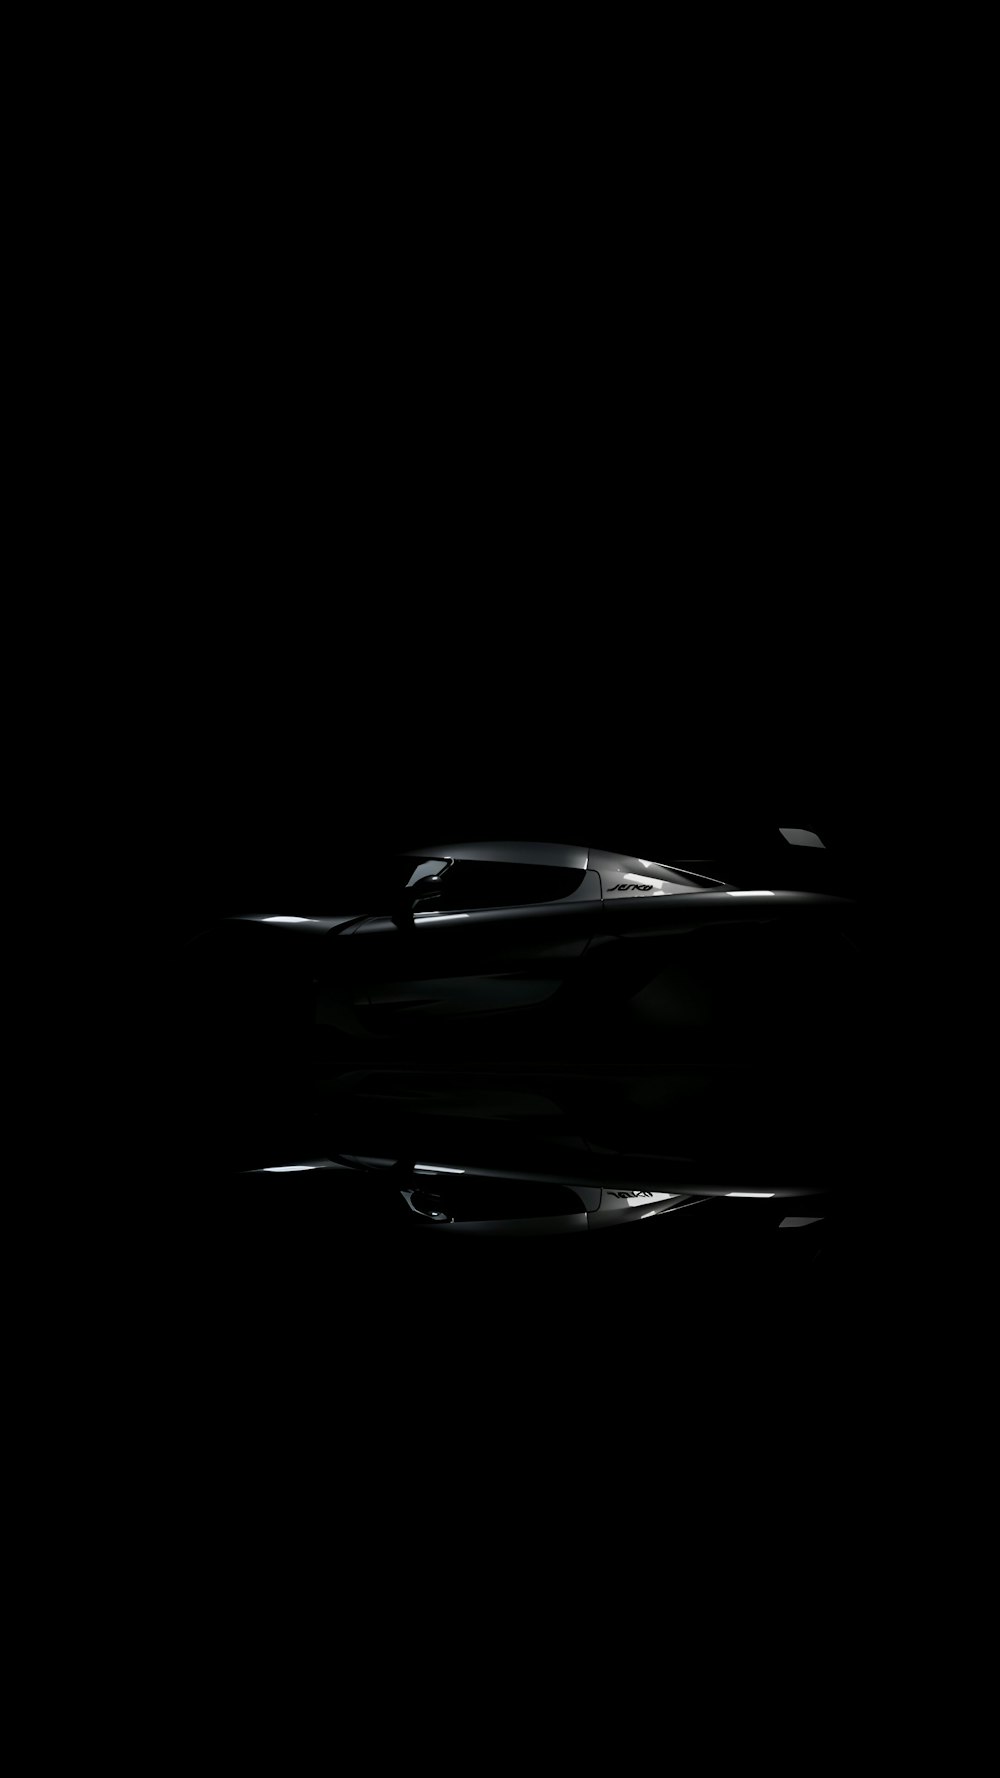 a black and white photo of a car in the dark